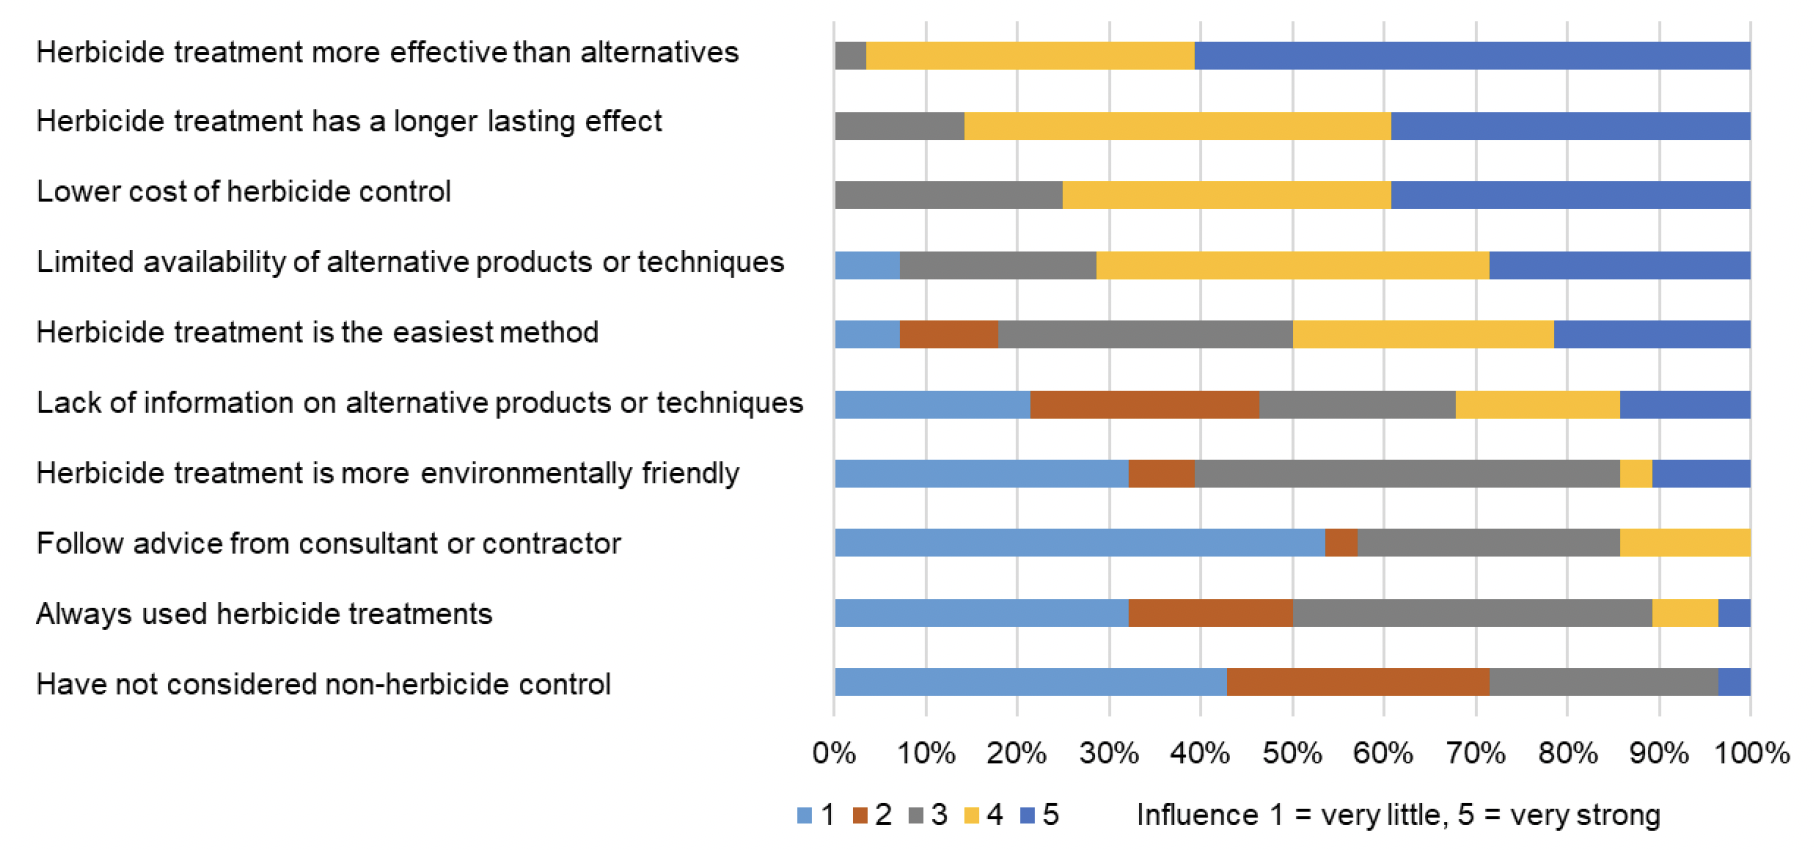 Stacked bar chart showing factors influencing Scottish Local Authority decisions to use herbicides rather than alternatives in 2019, where the fact that herbicide treatments were more effective than non-chemical alternatives had the strongest influence.